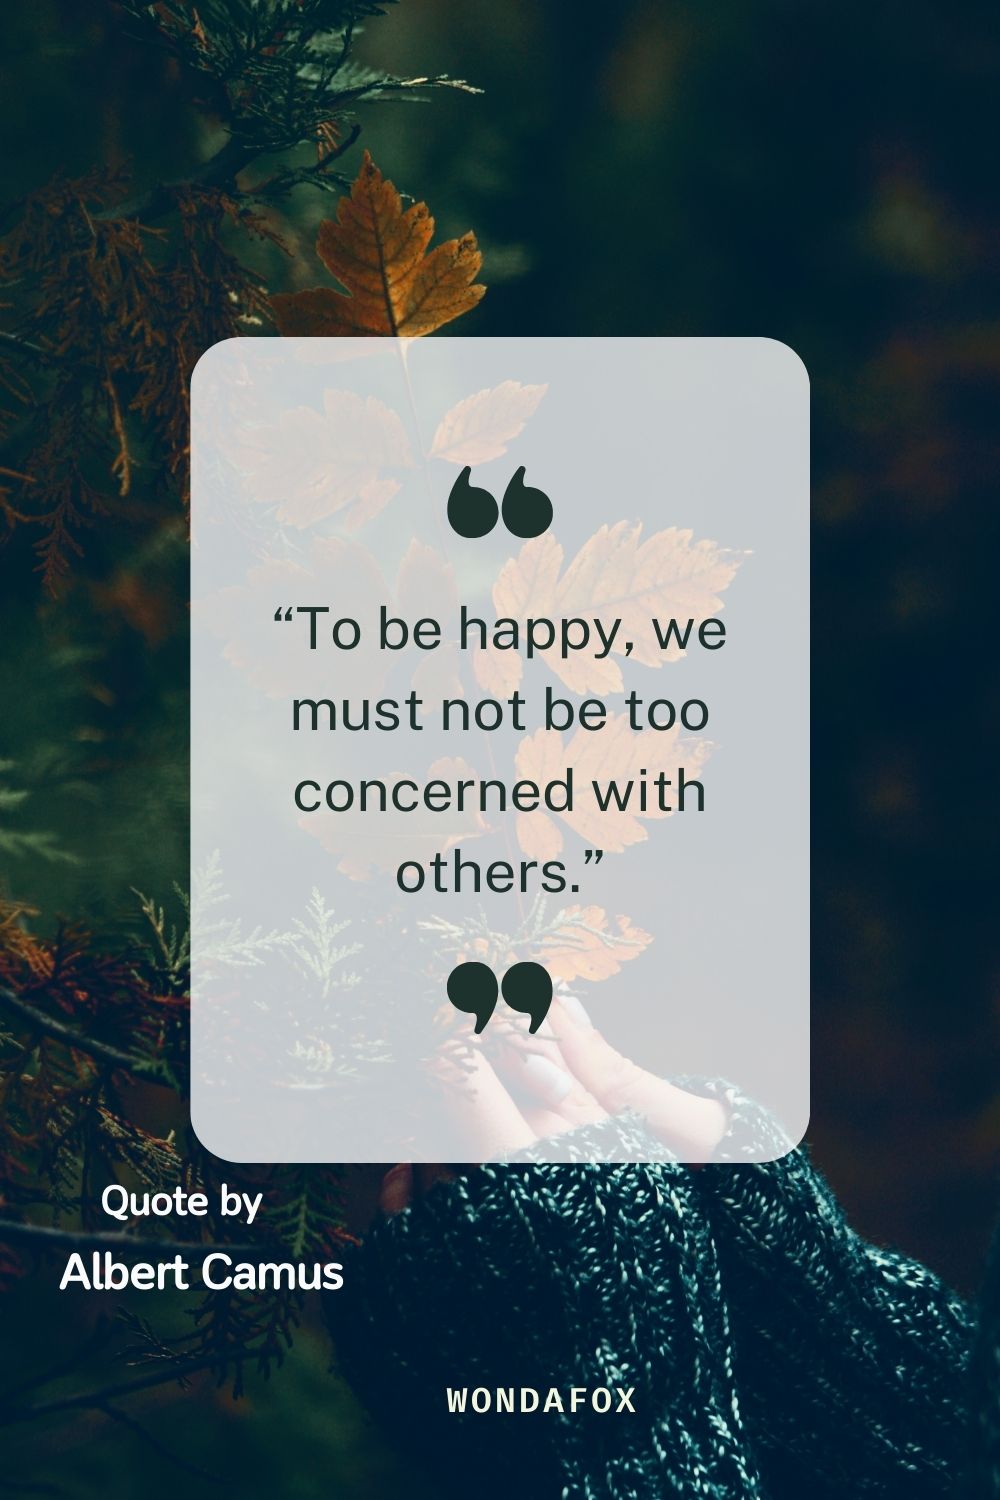 “To be happy, we must not be too concerned with others.”
Albert Camus